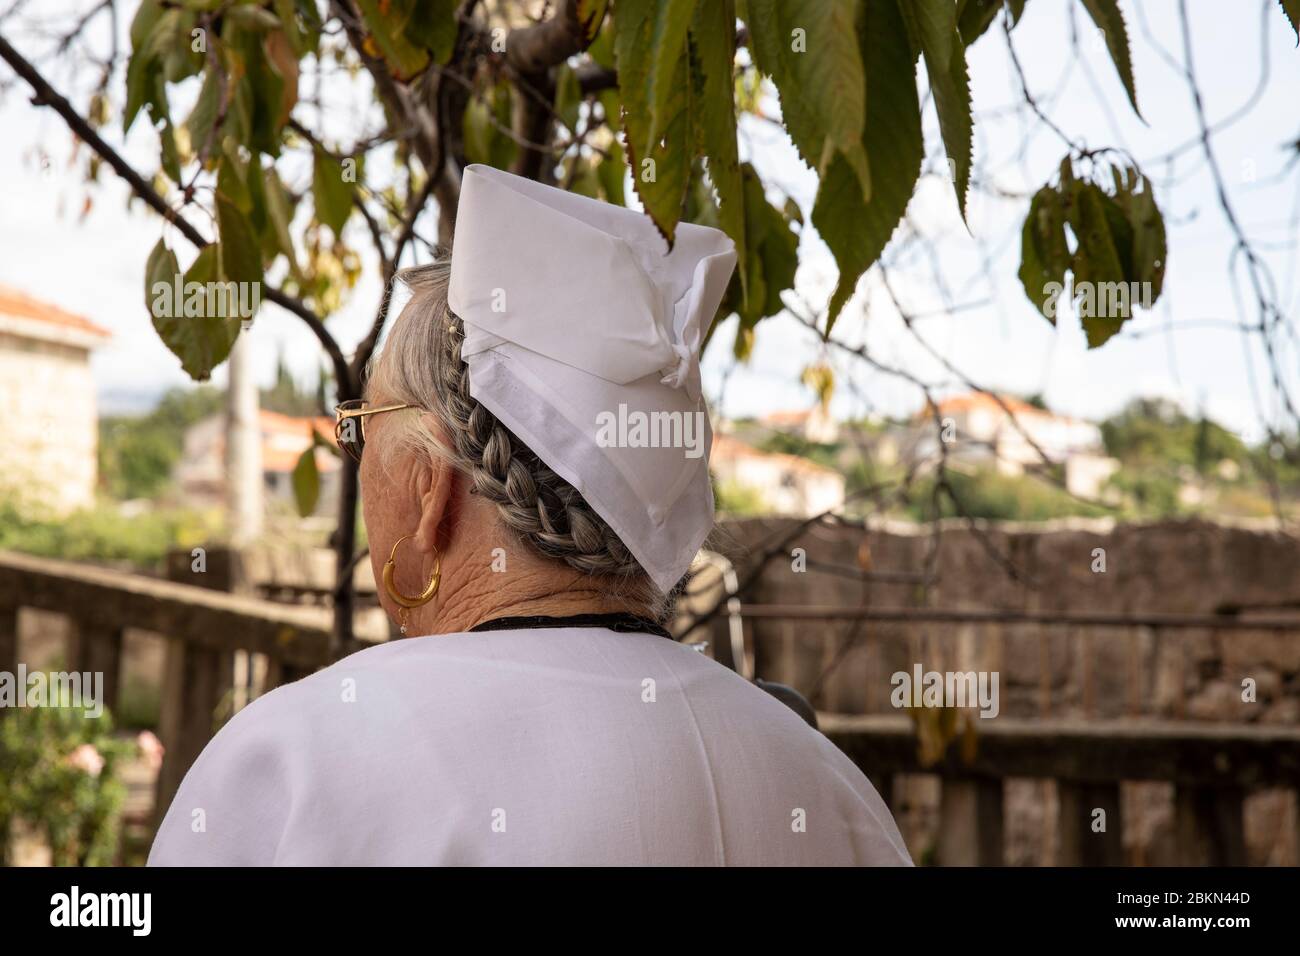 An elderly woman wearing typical Dalmatian golden earrings and a traditional folklore costume with a white kerhief hat and braided hair in Konavle, Da Stock Photo